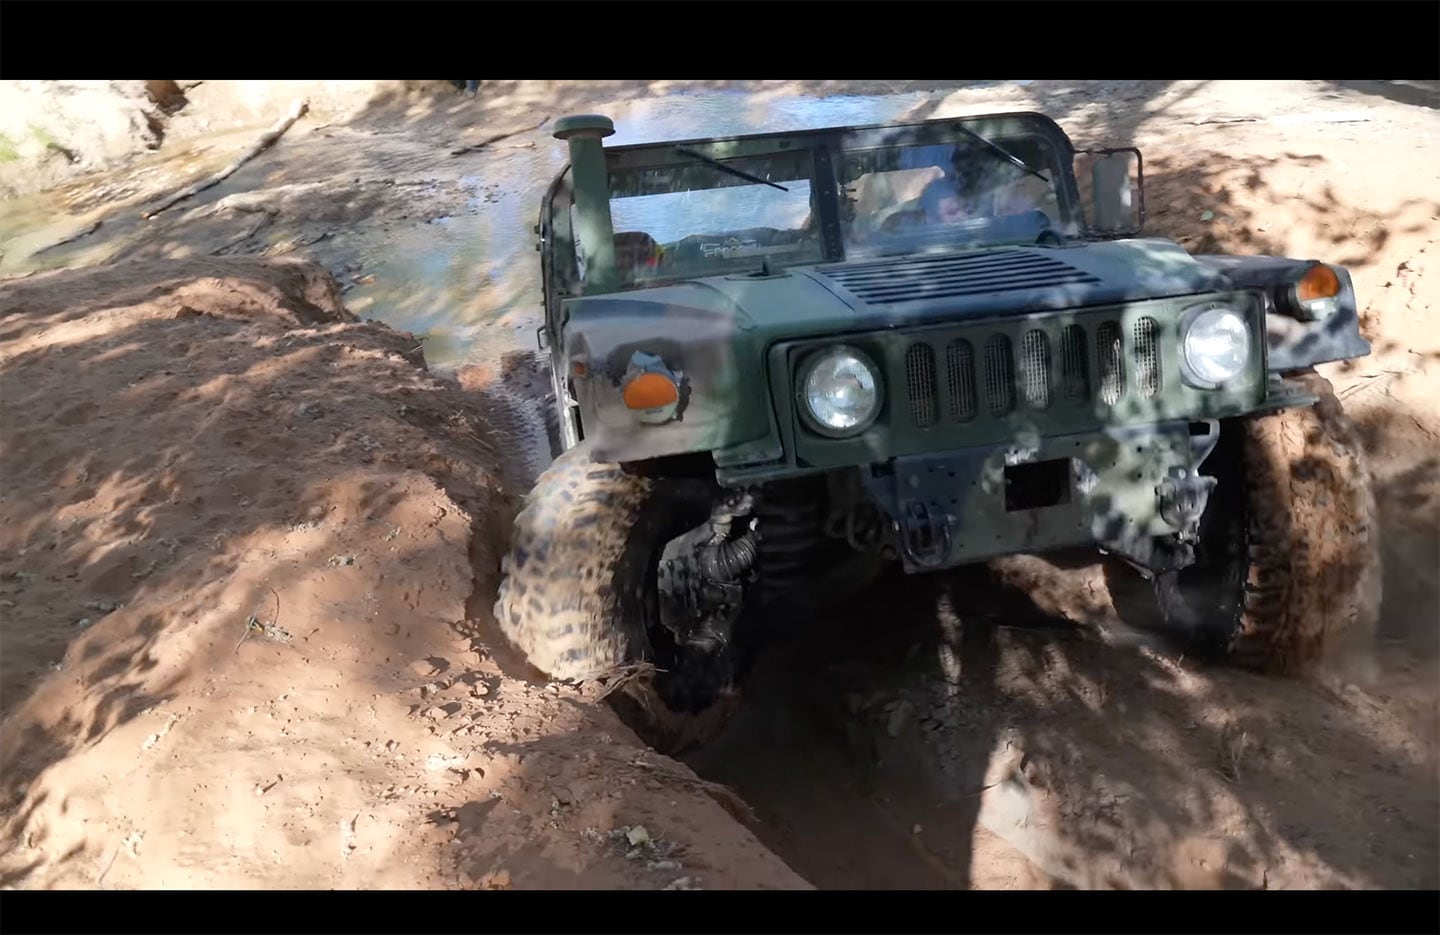 It took so much work to get to this point, but the Humvee wasn’t done needing stuff.